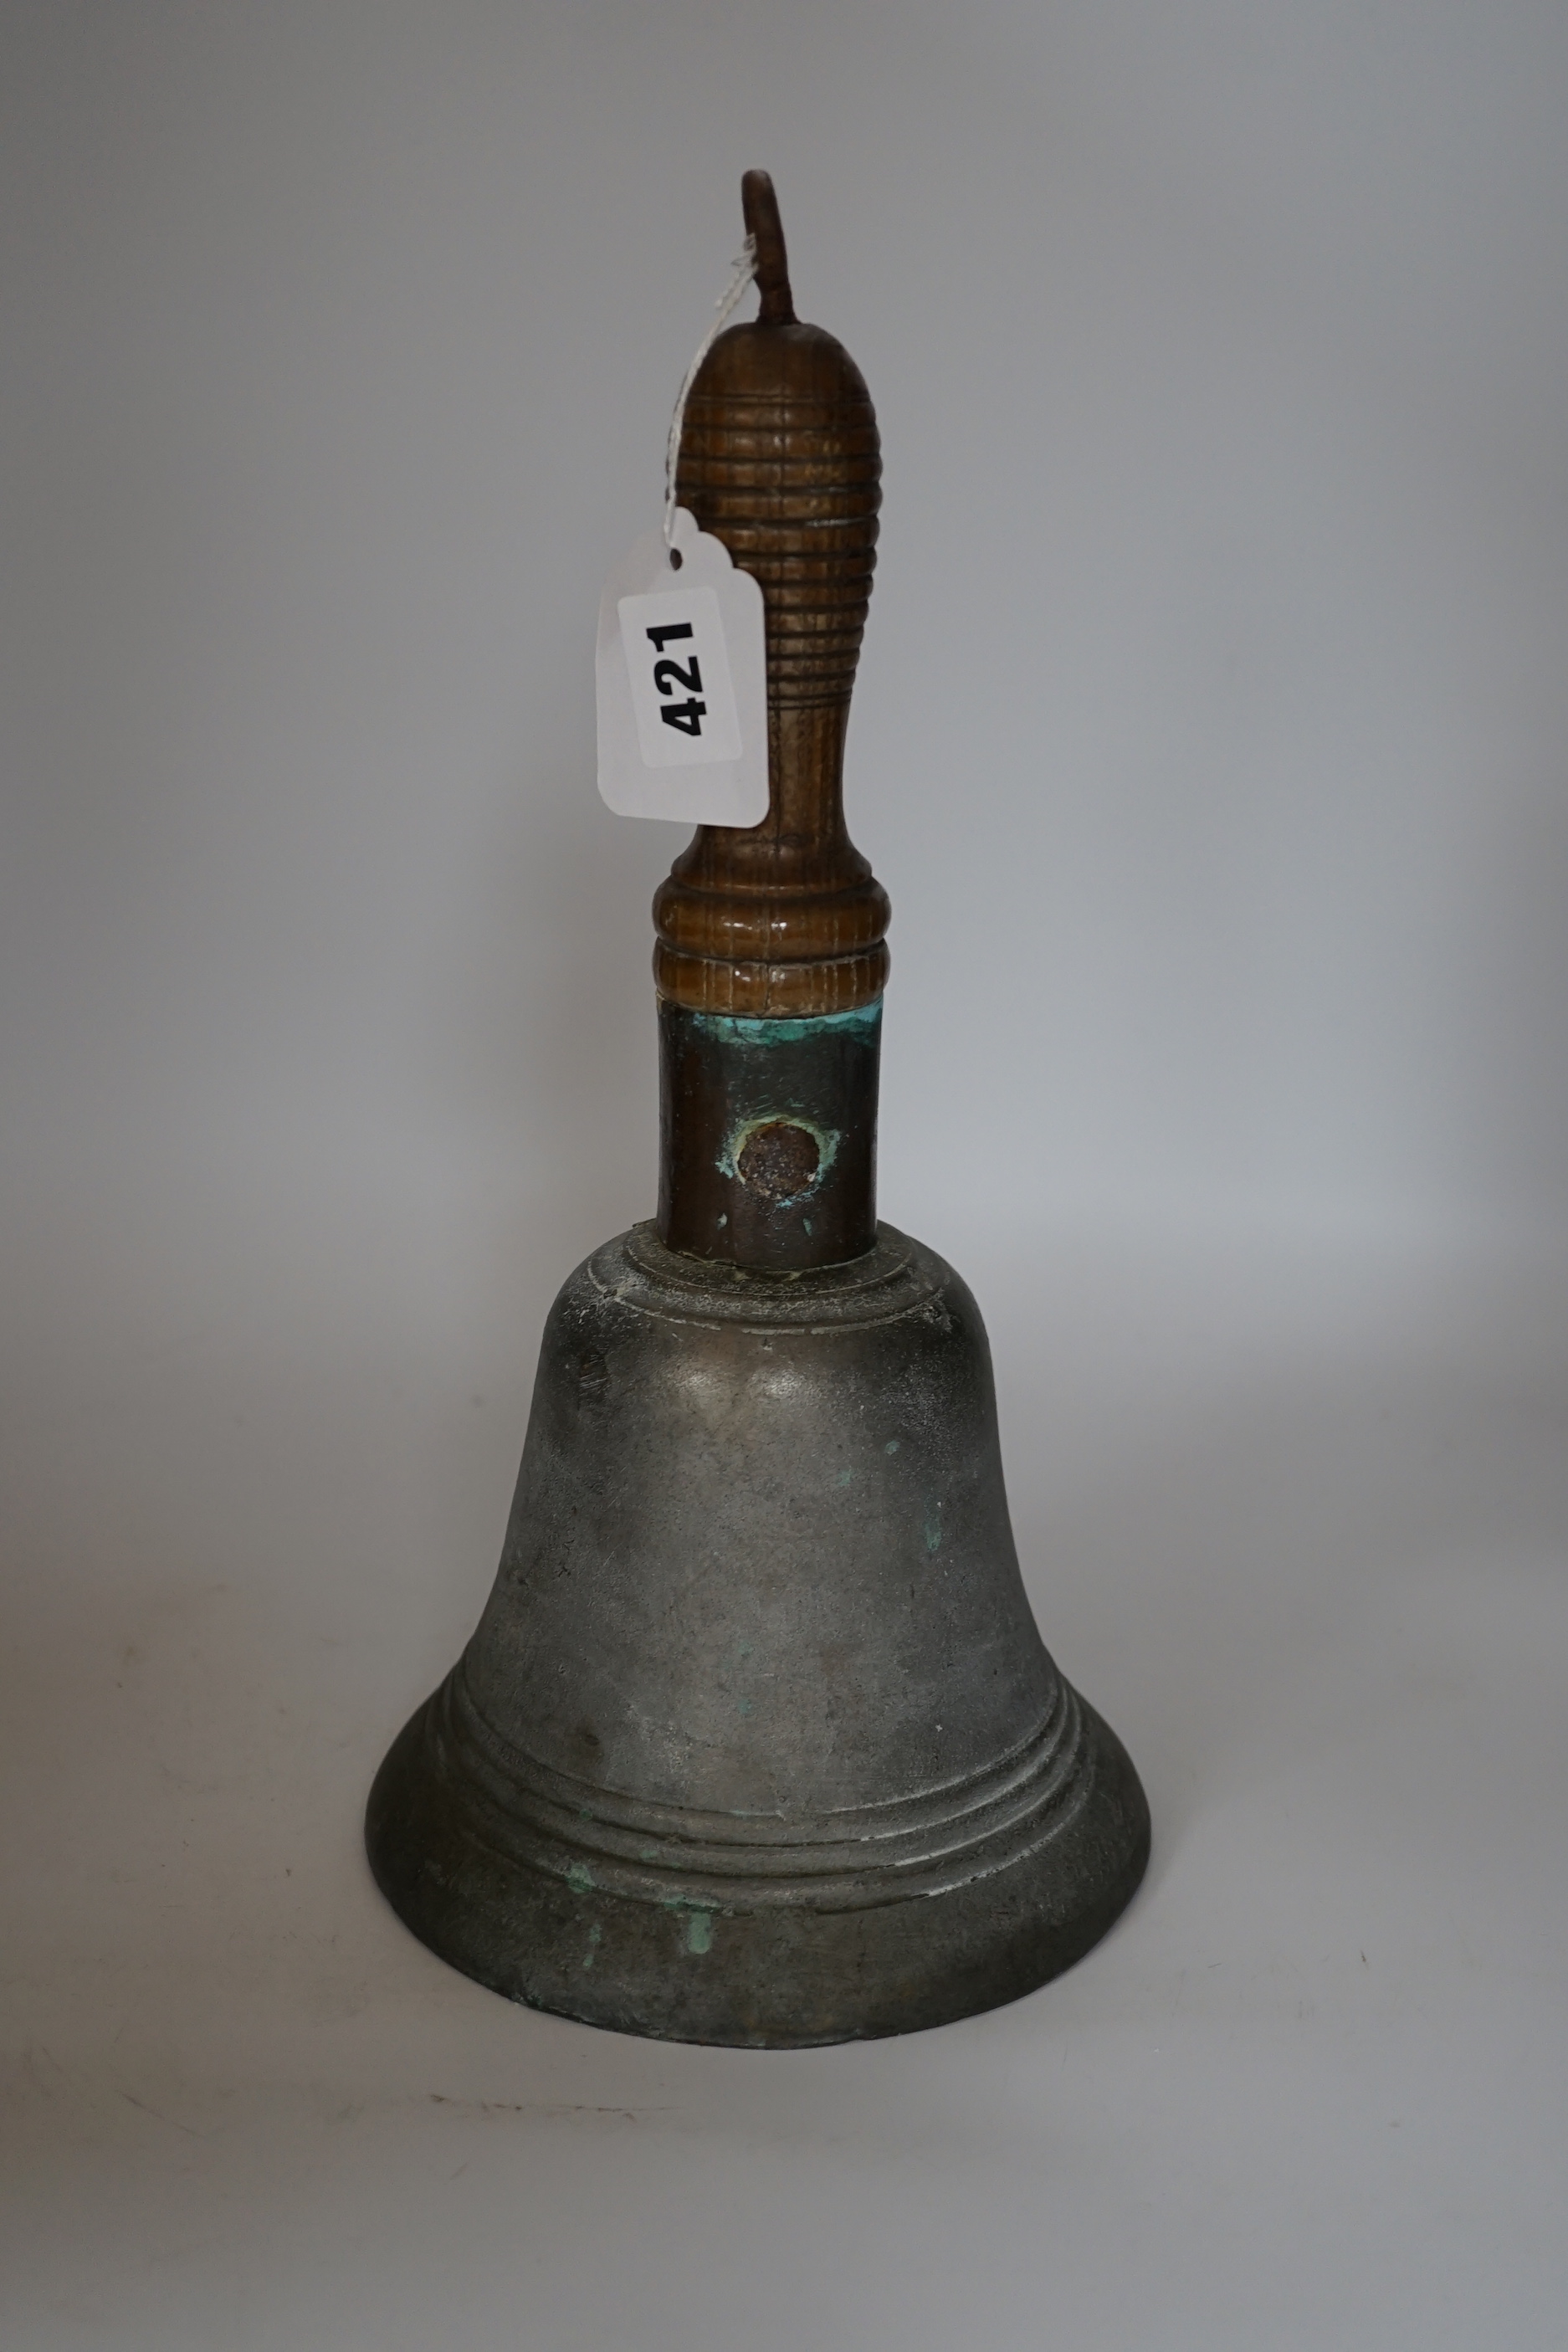 A bronze handbell with wooden handle, 31cm